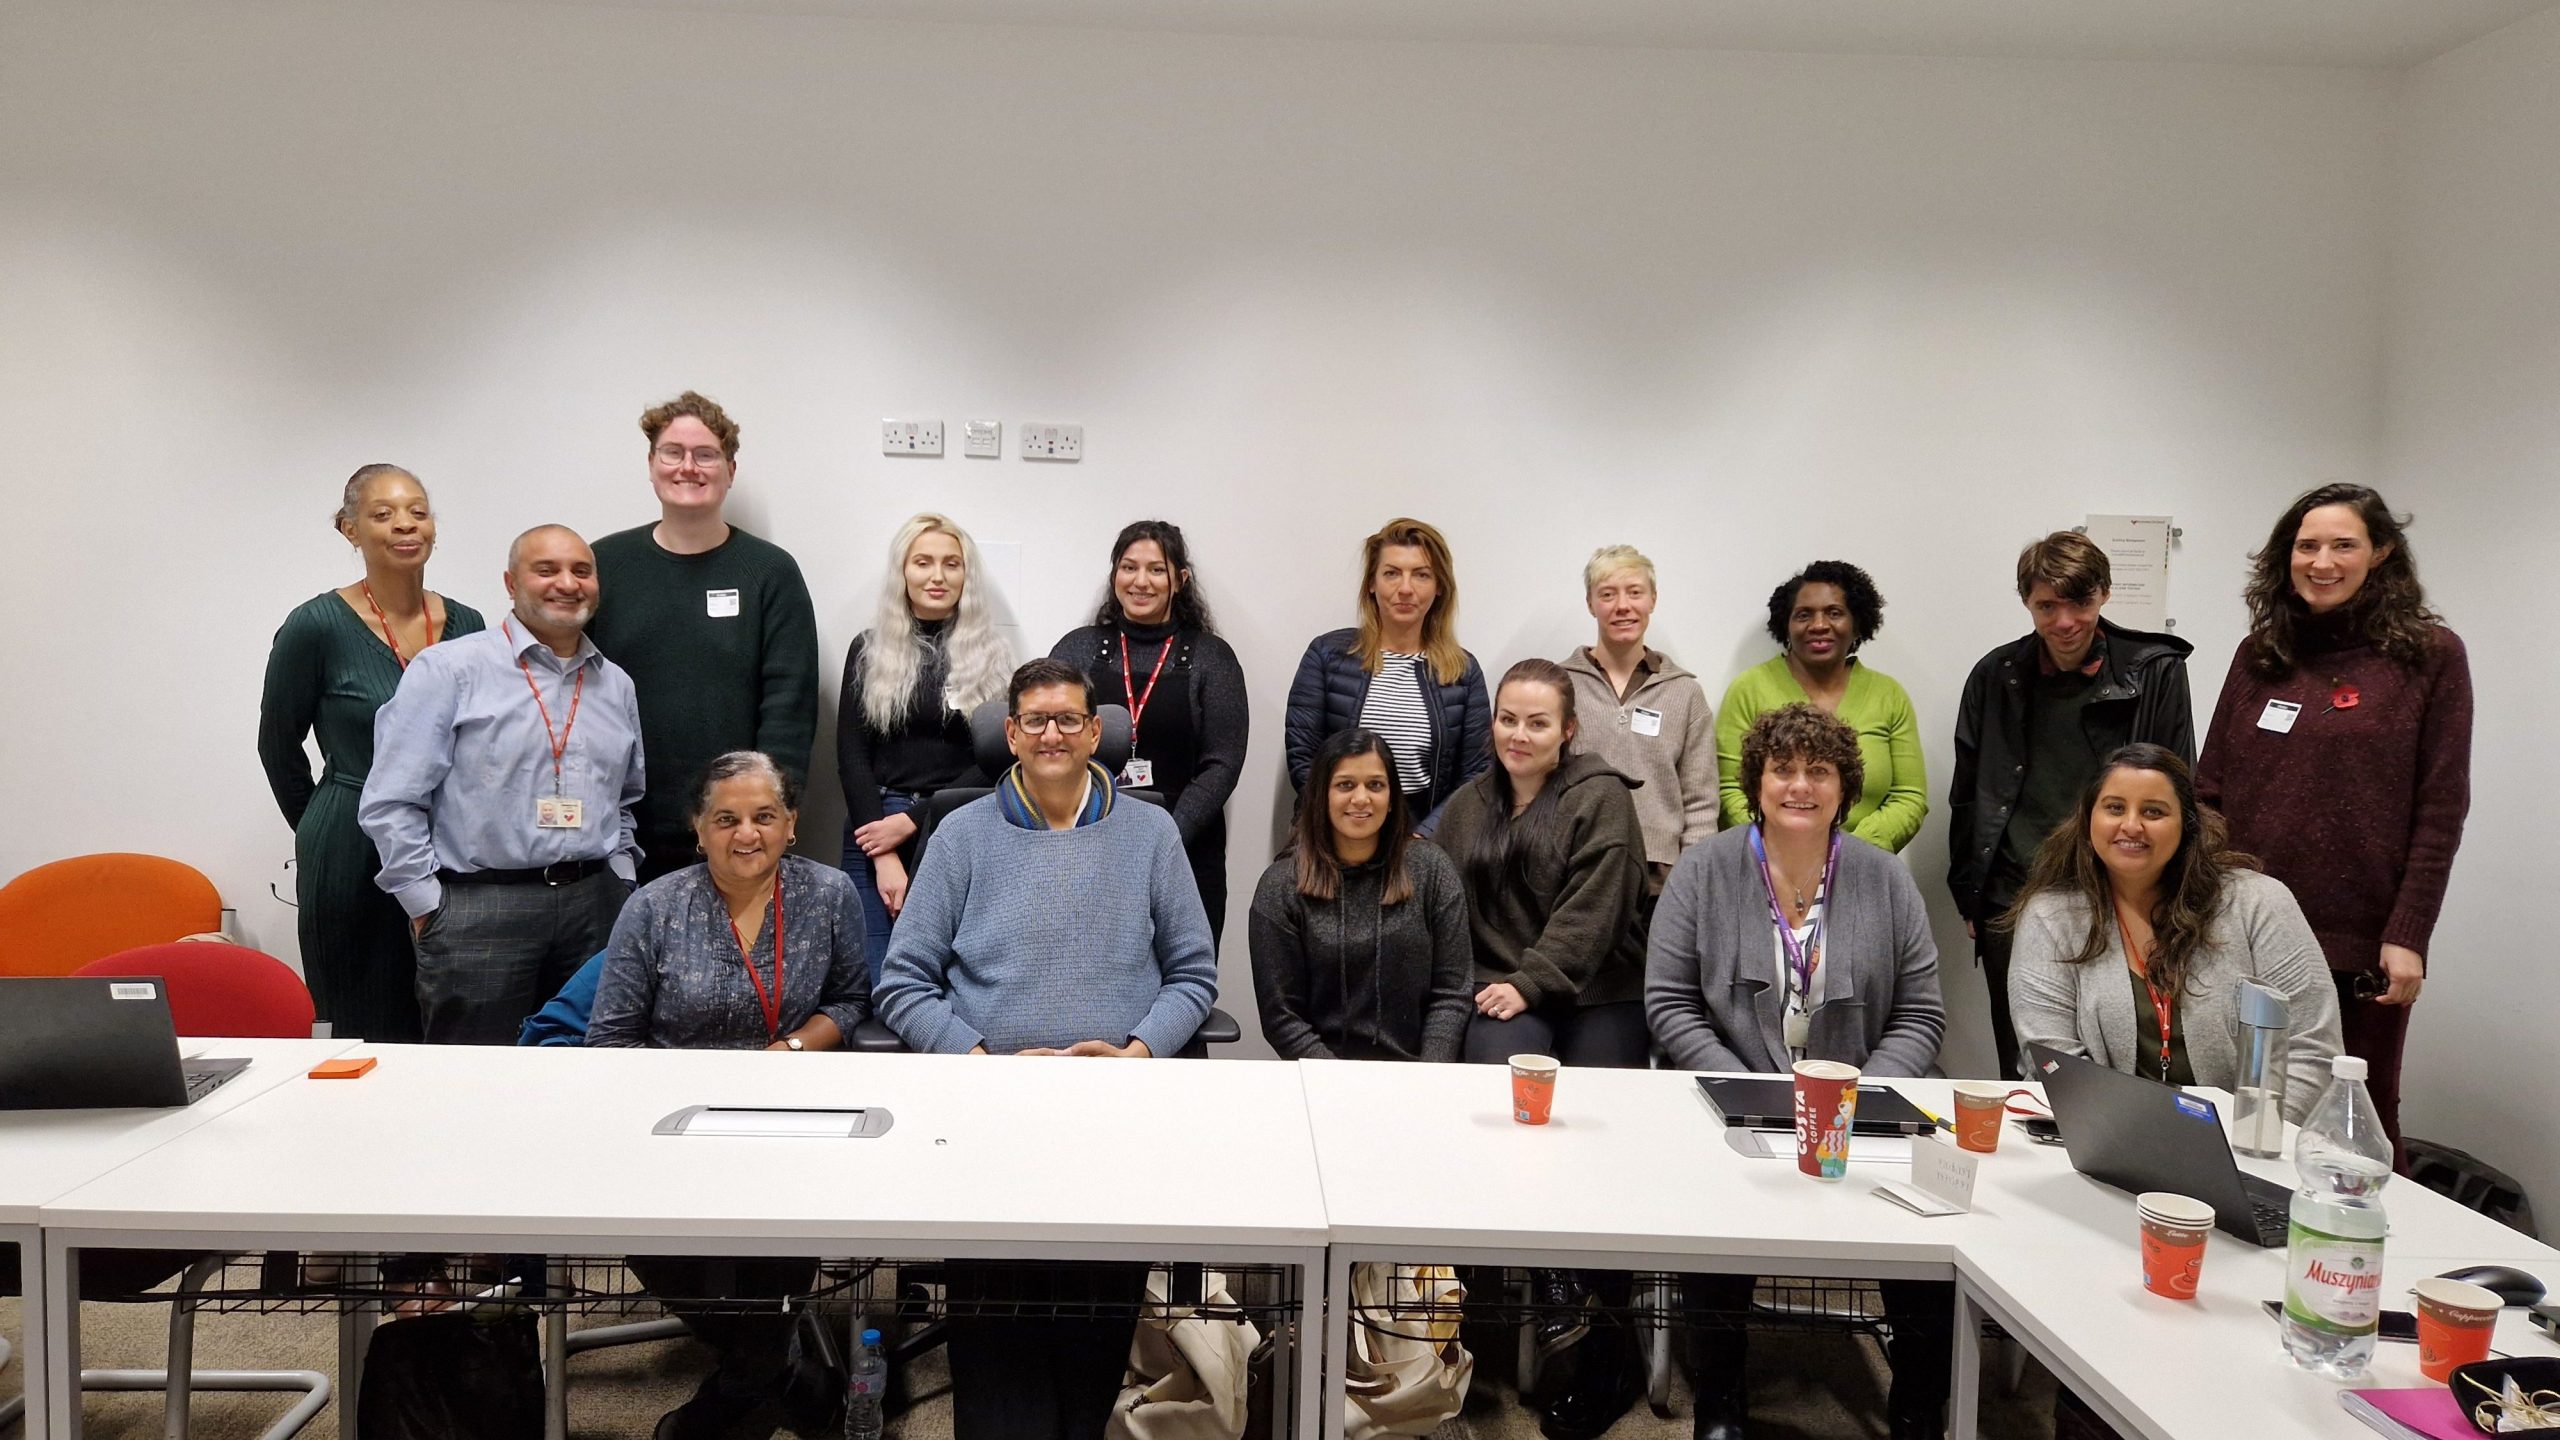 This is a group of diverse people posing for a photo. The group consists of staff from the Child Employment Team, Business Support Team and the Customer Service Programme team who attended the Ideation session at Woodcock Street offices on 7 November 2022.